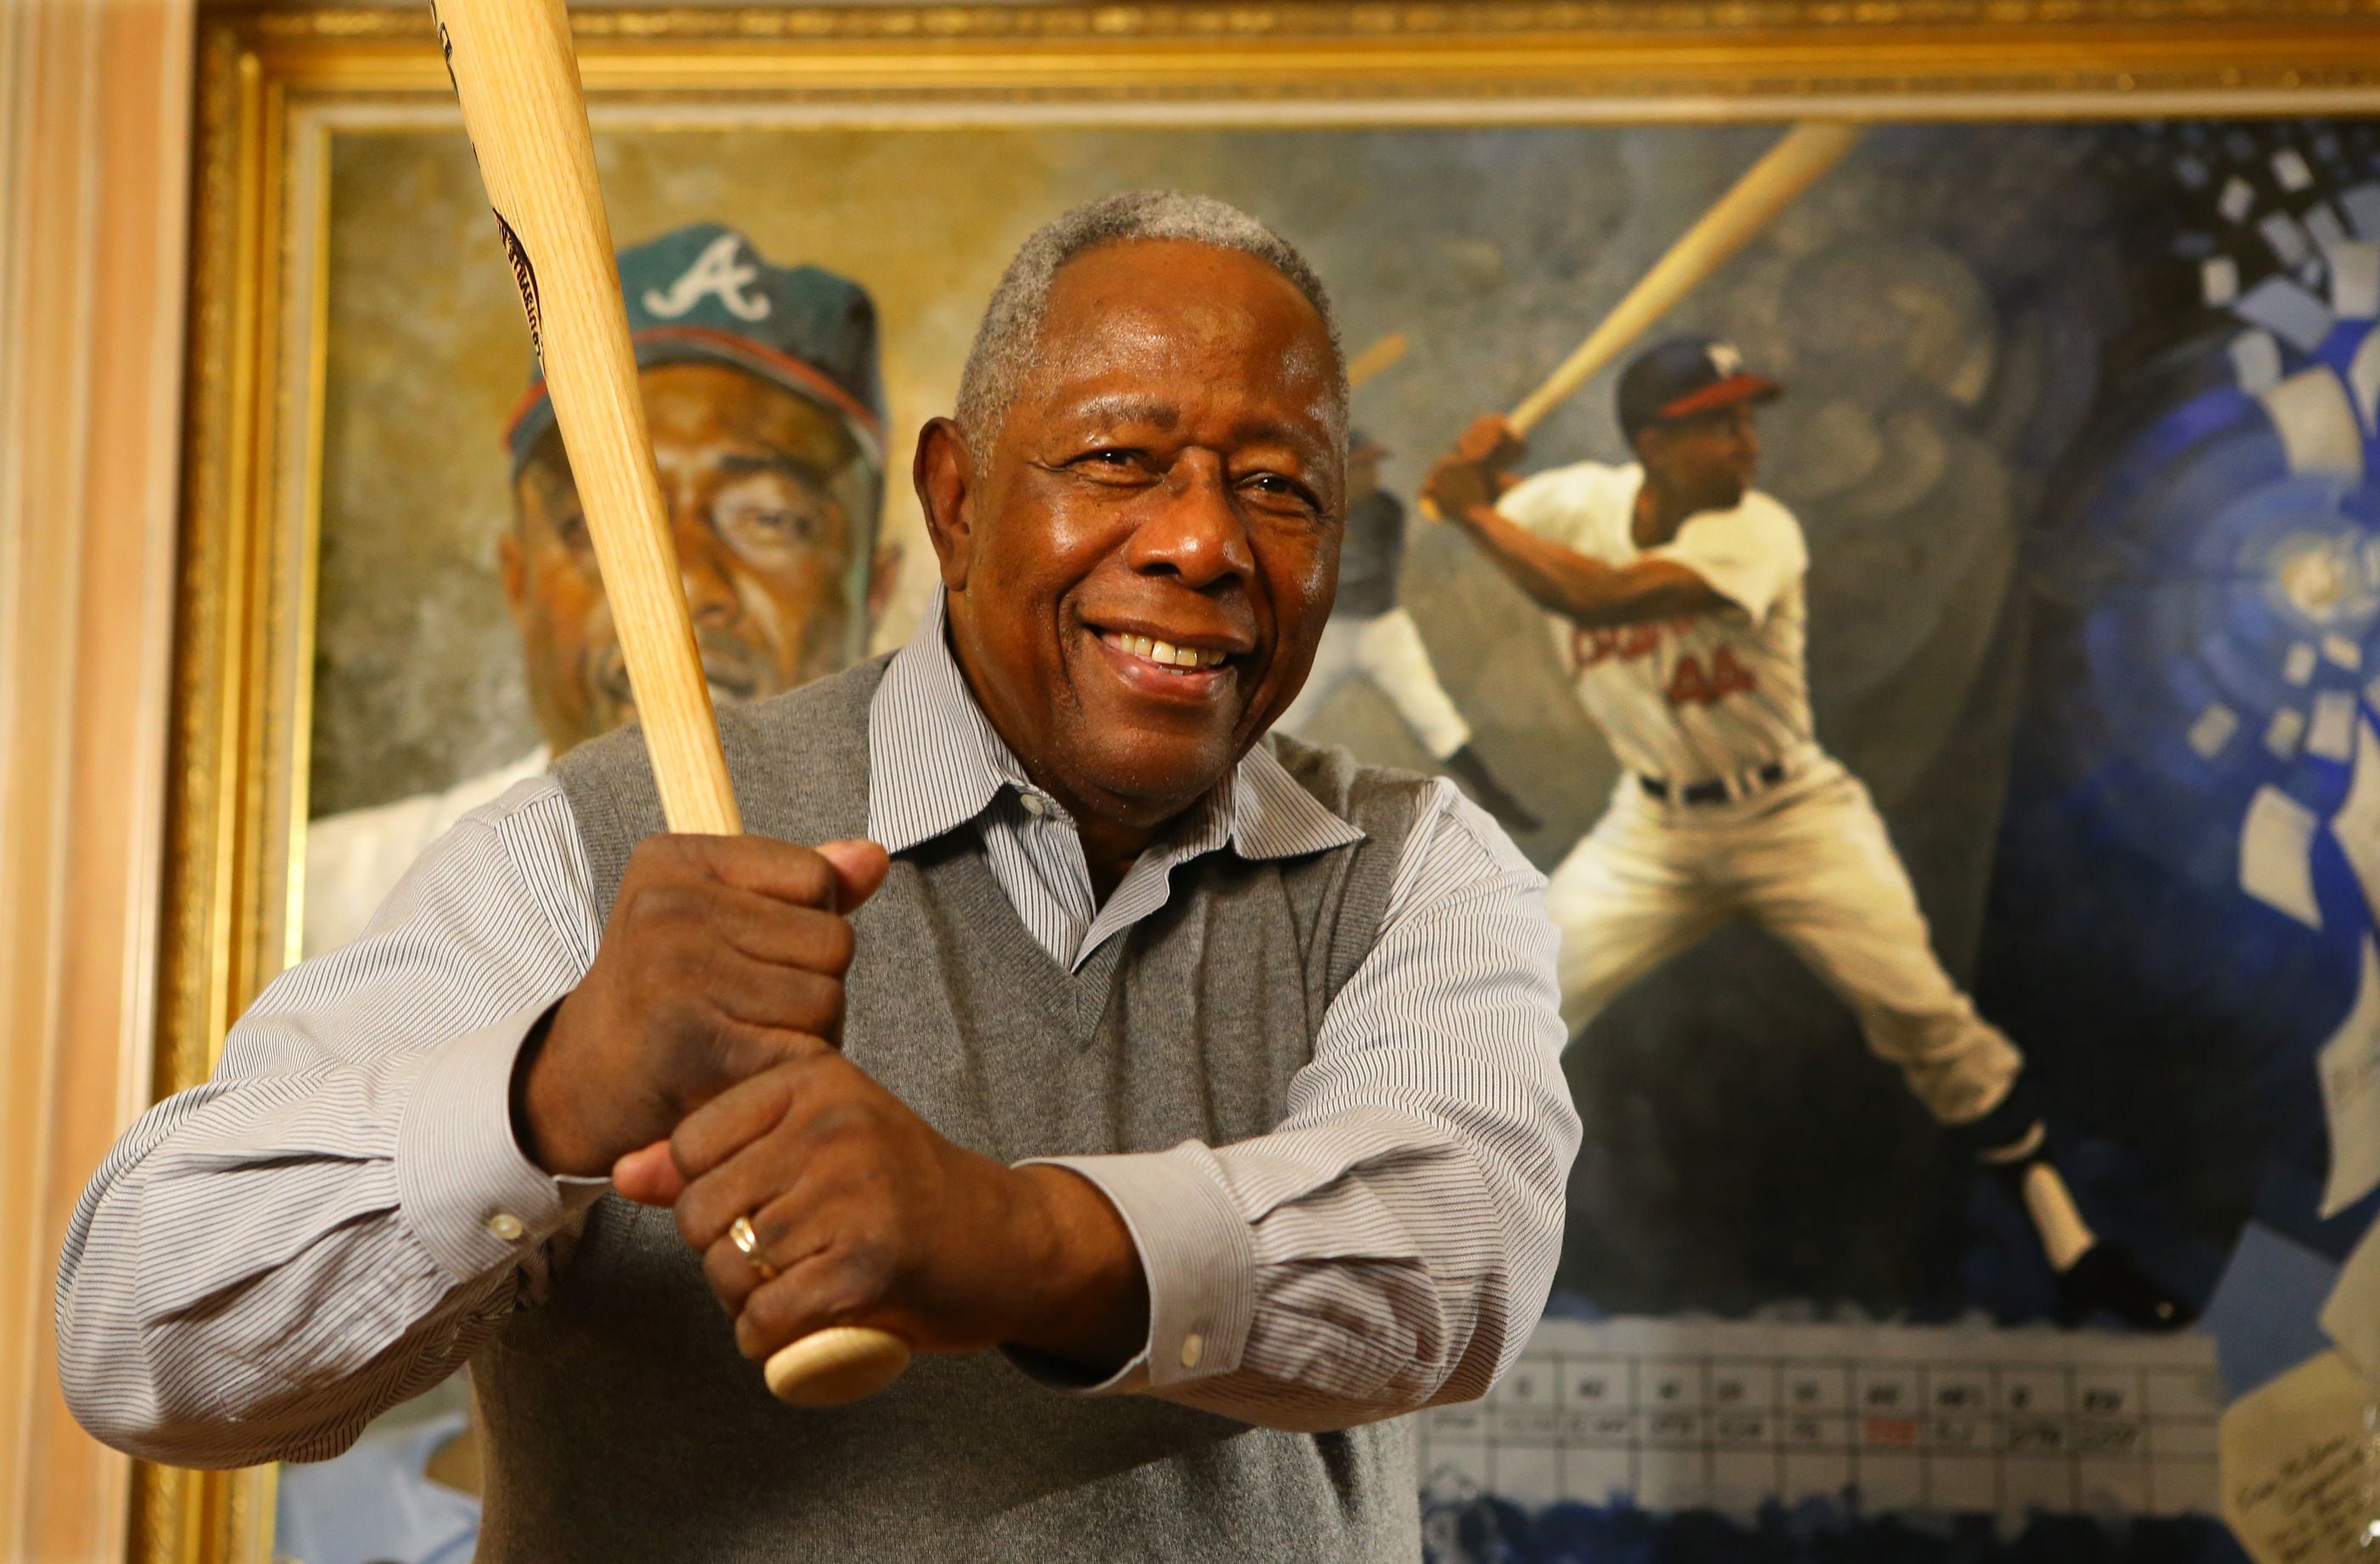 Hank Aaron - The triple is the most exciting play in